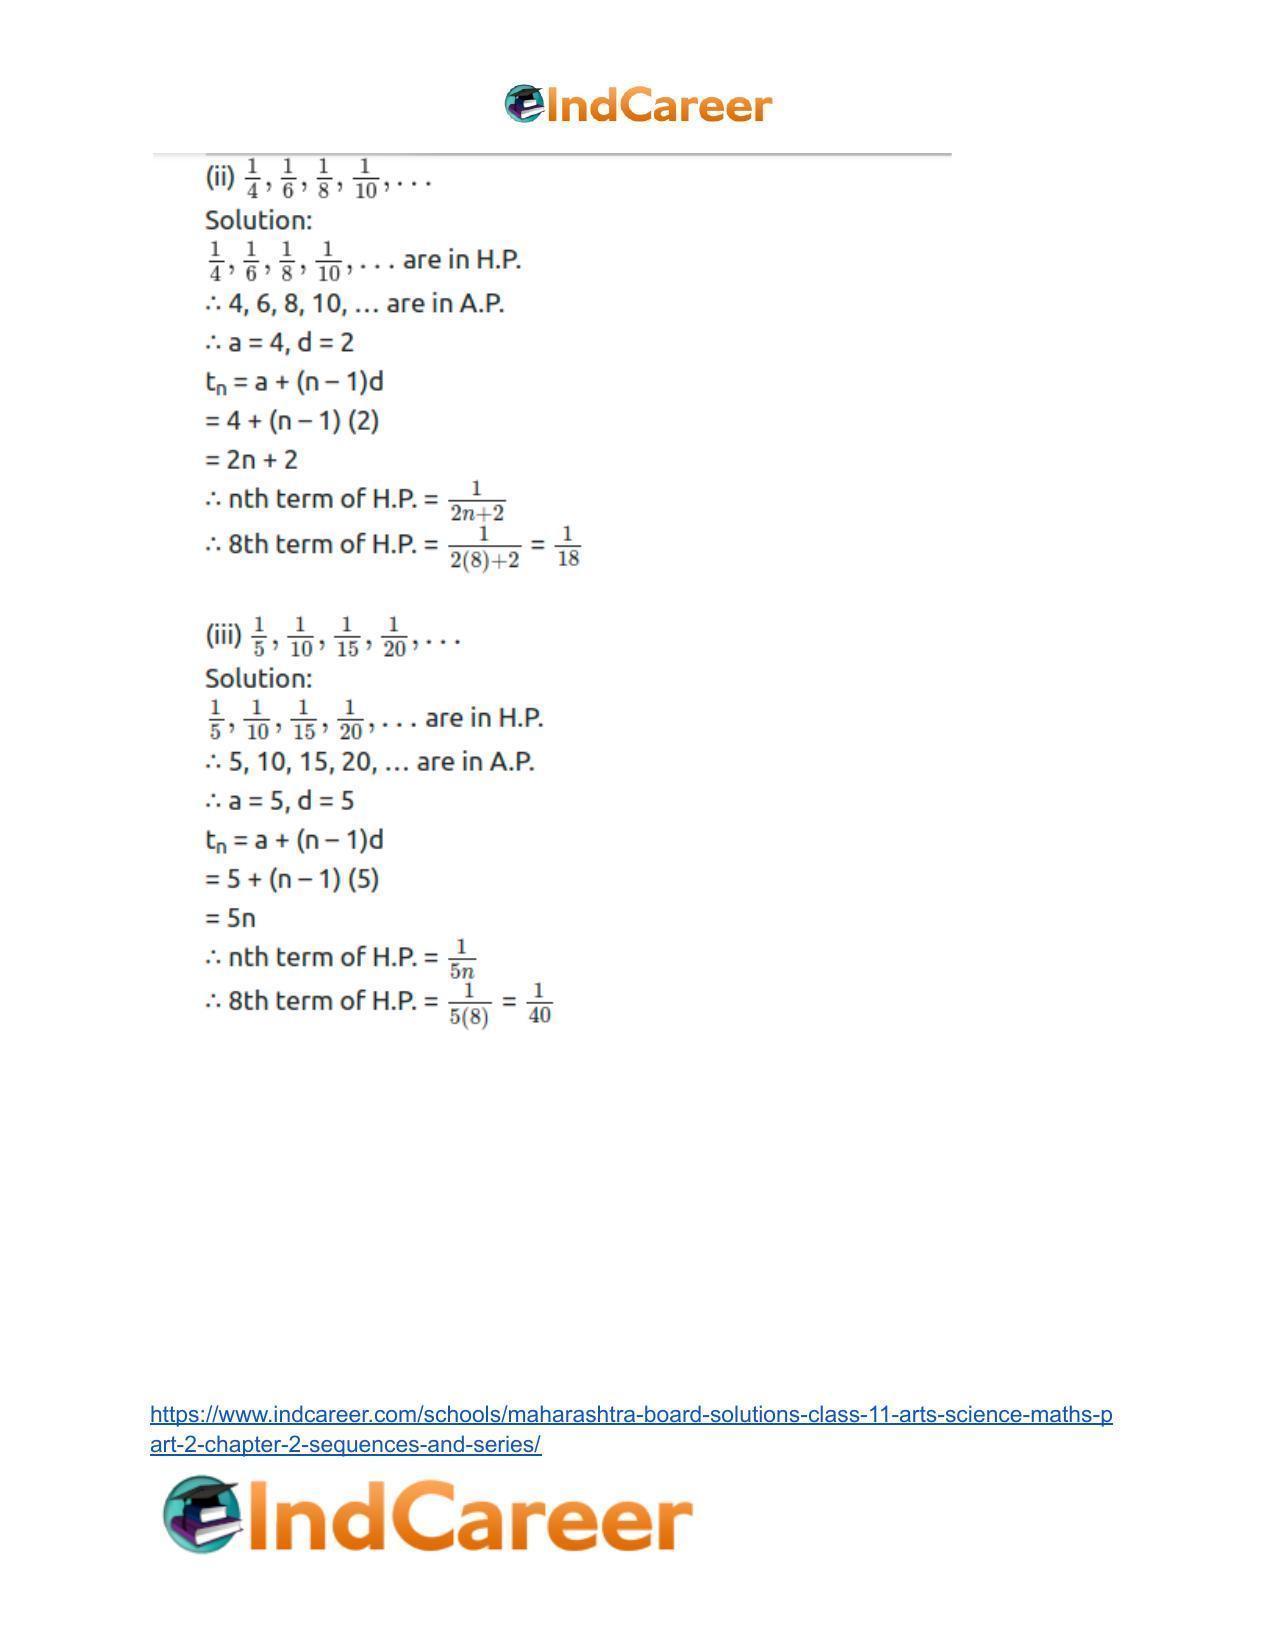 Maharashtra Board Solutions Class 11-Arts & Science Maths (Part 2): Chapter 2- Sequences and Series - Page 53